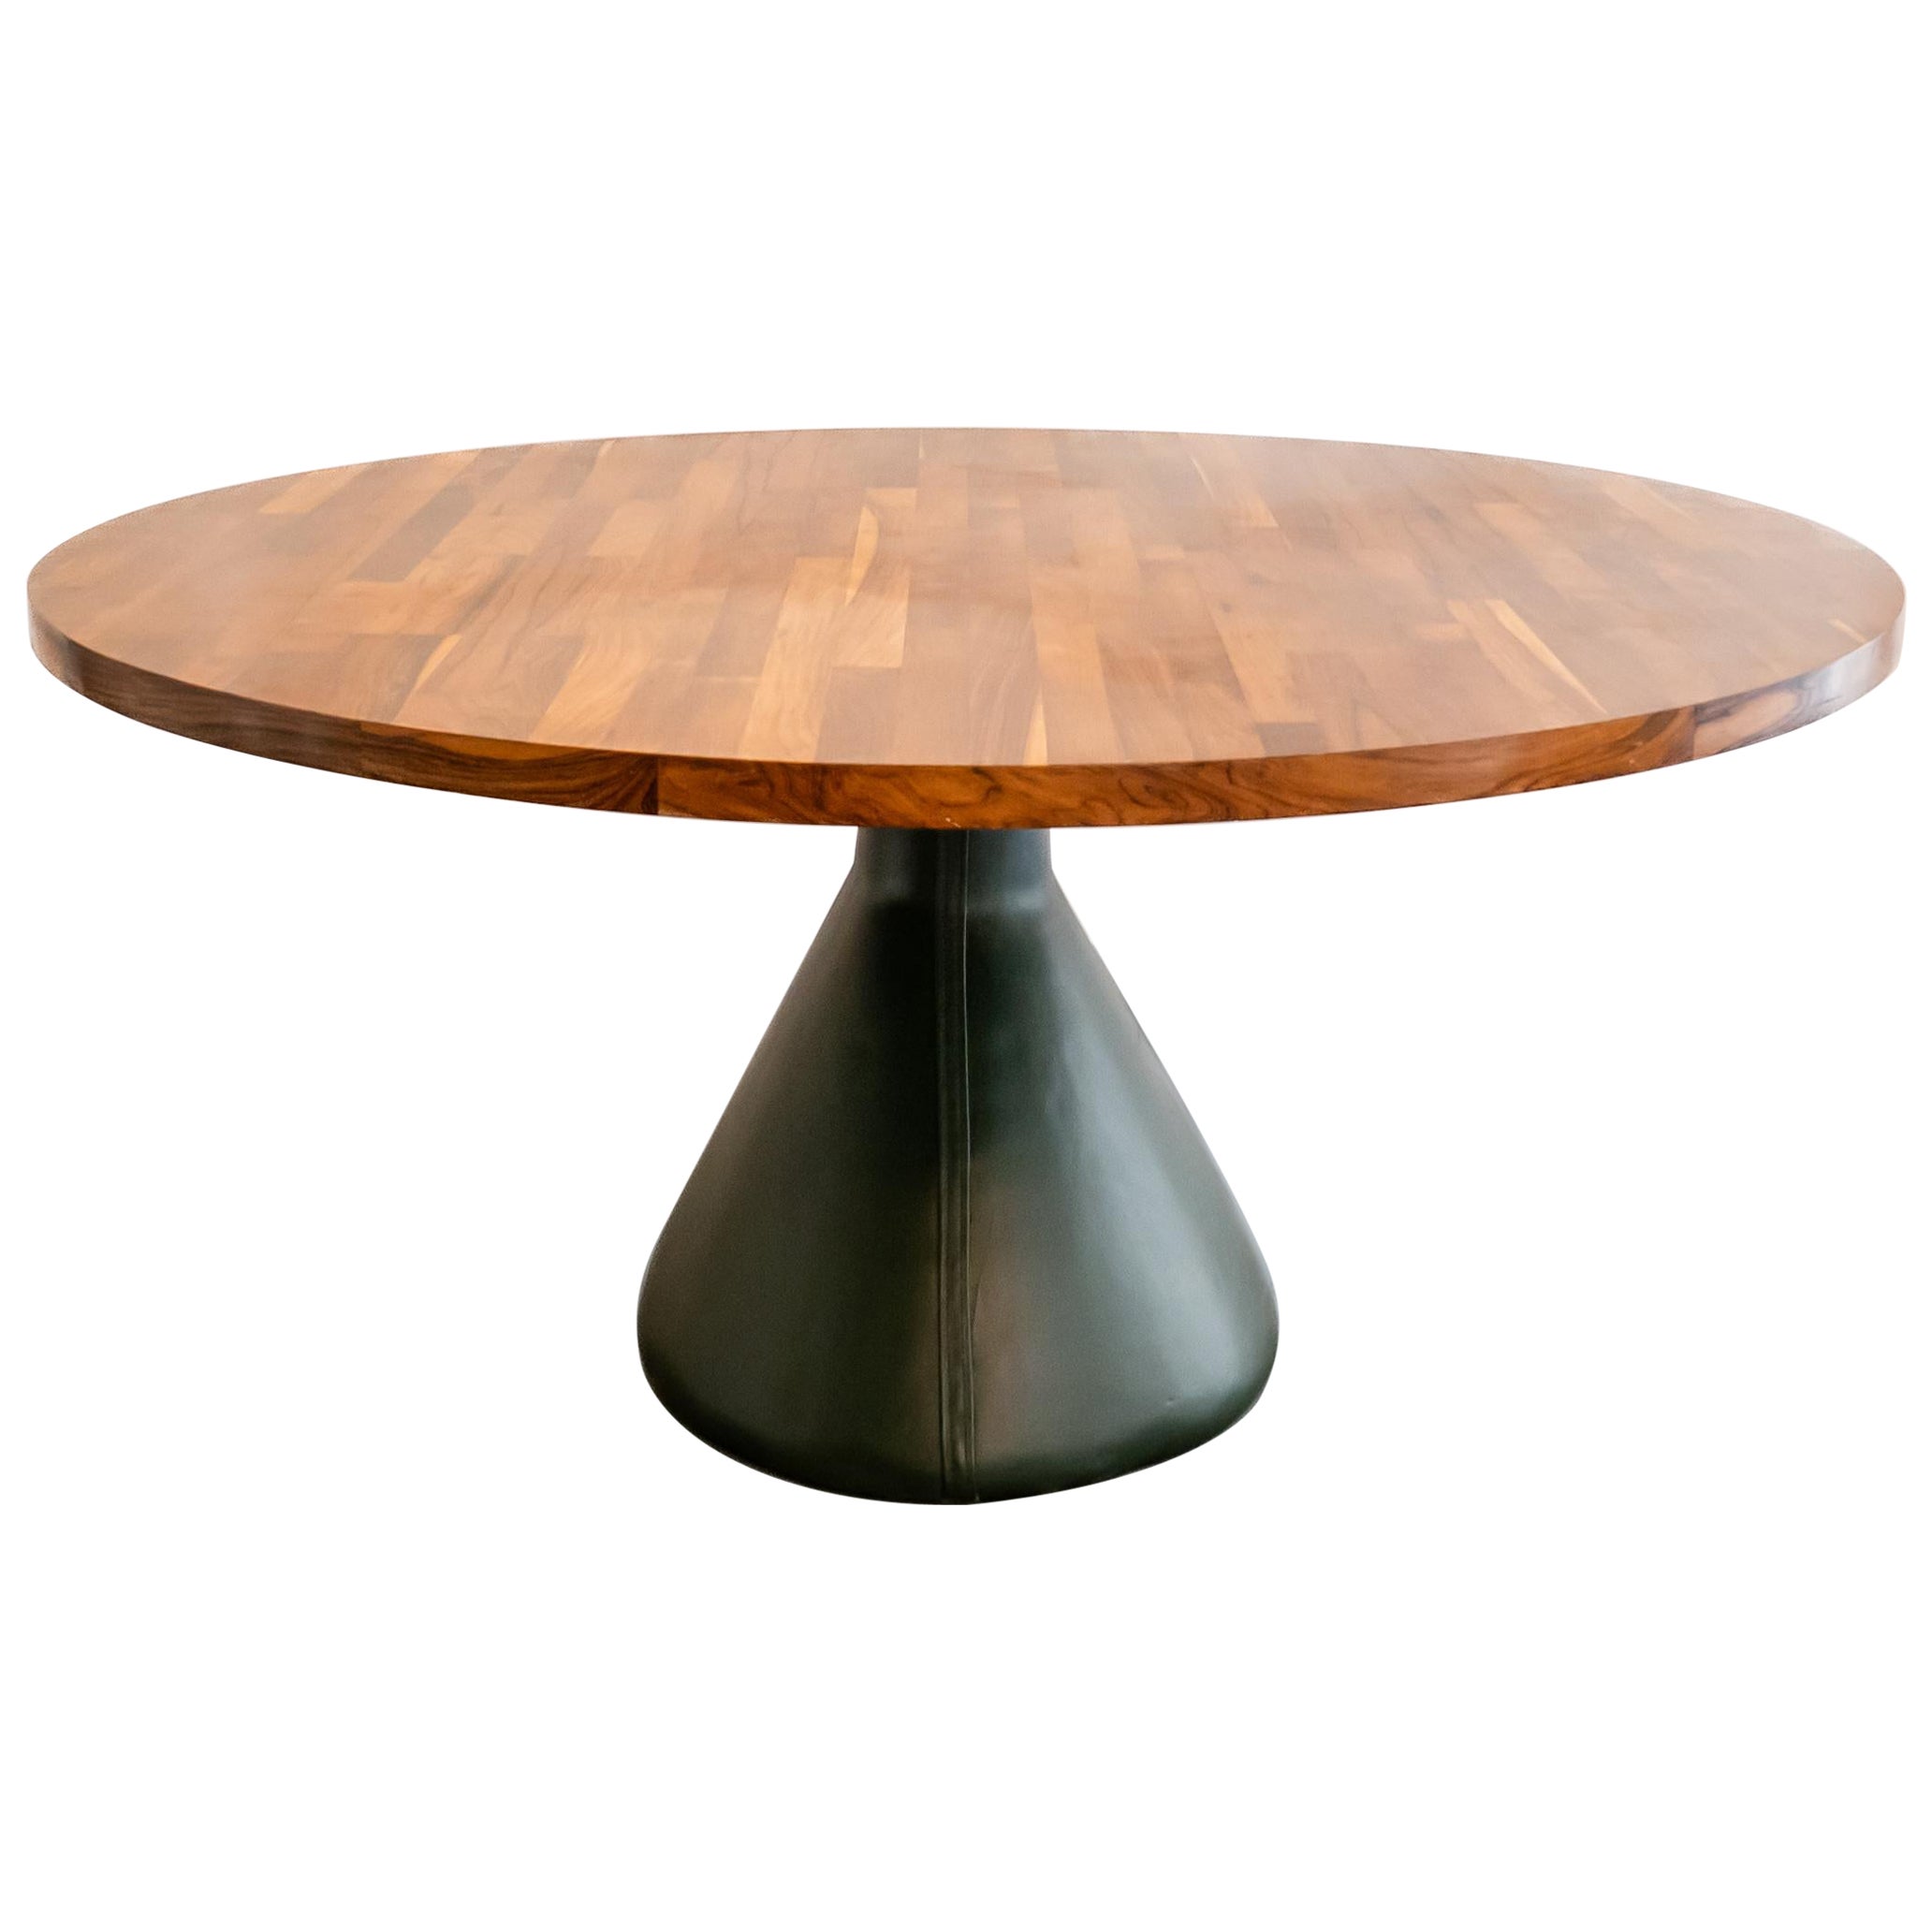 Mid-Century Modern Round Wooden Leather Dining Table by Jorge Zalszupin, 1960s For Sale